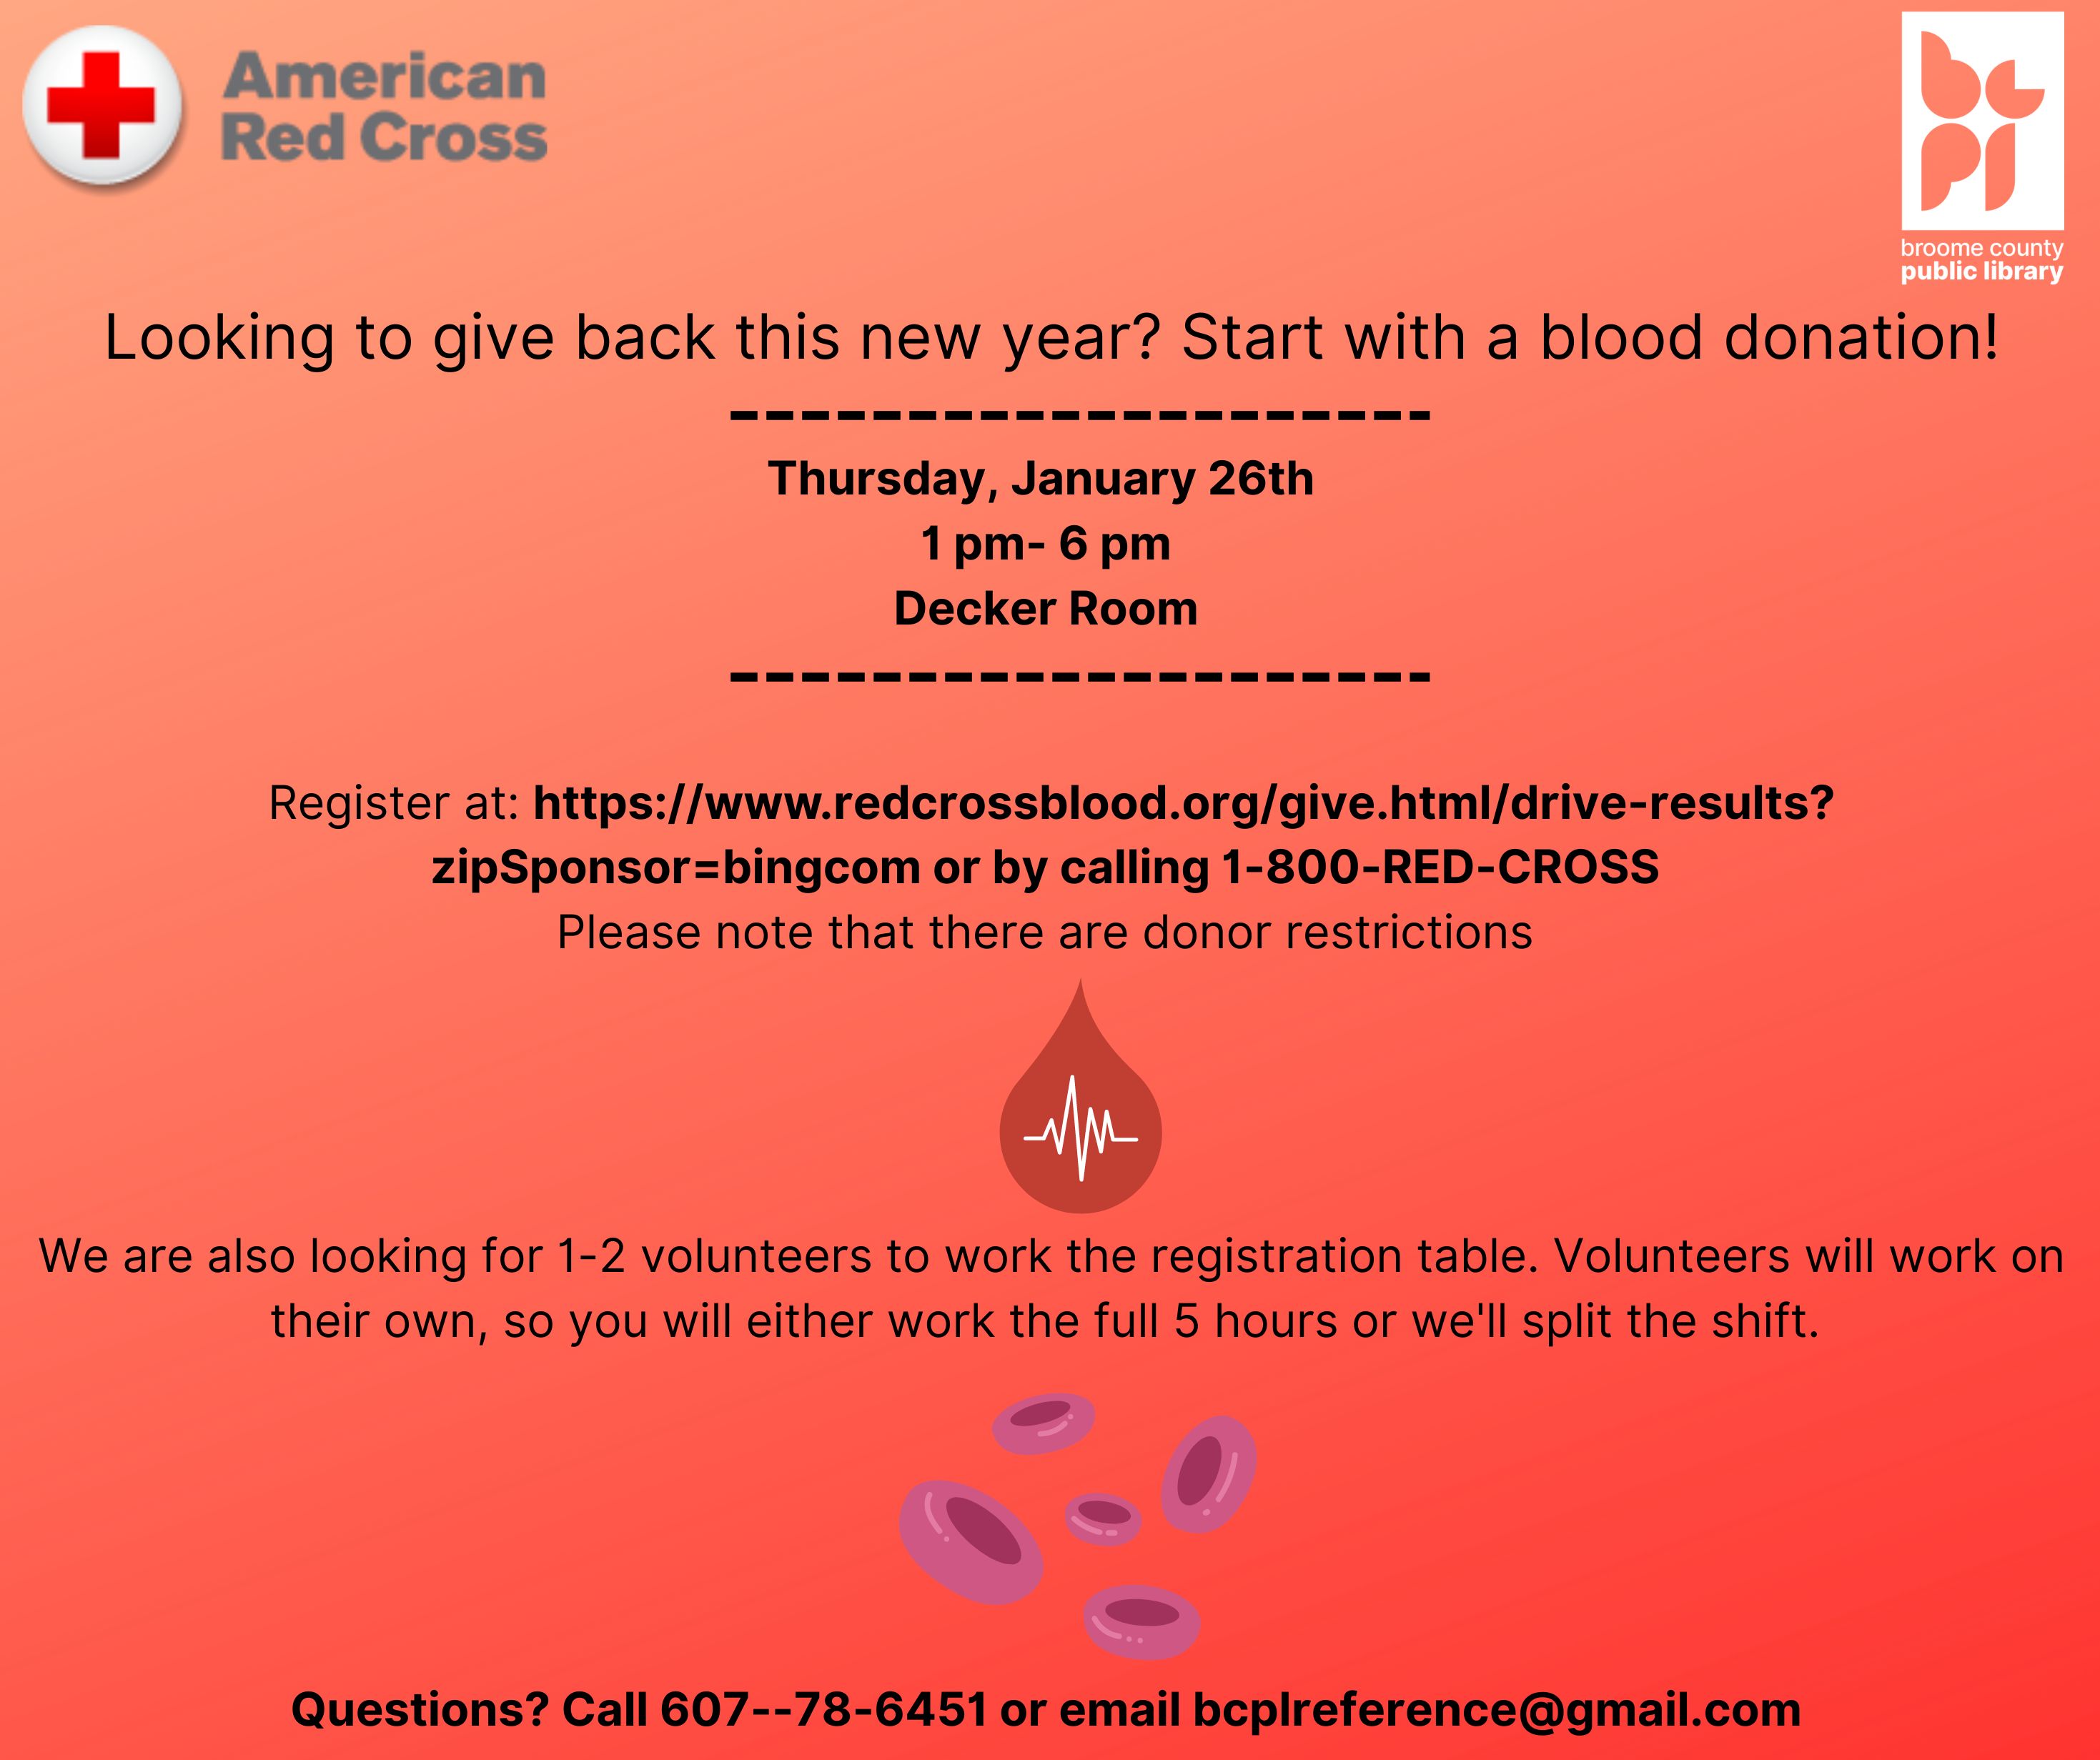 Posters with the blood drive details. Background is red and pink. It says the blood drive is on Jan. 26th from 1-6pm and provides a registration link. There are stock images of a drop of blood and blood cells, along with the Red Cross and BCPL logos.